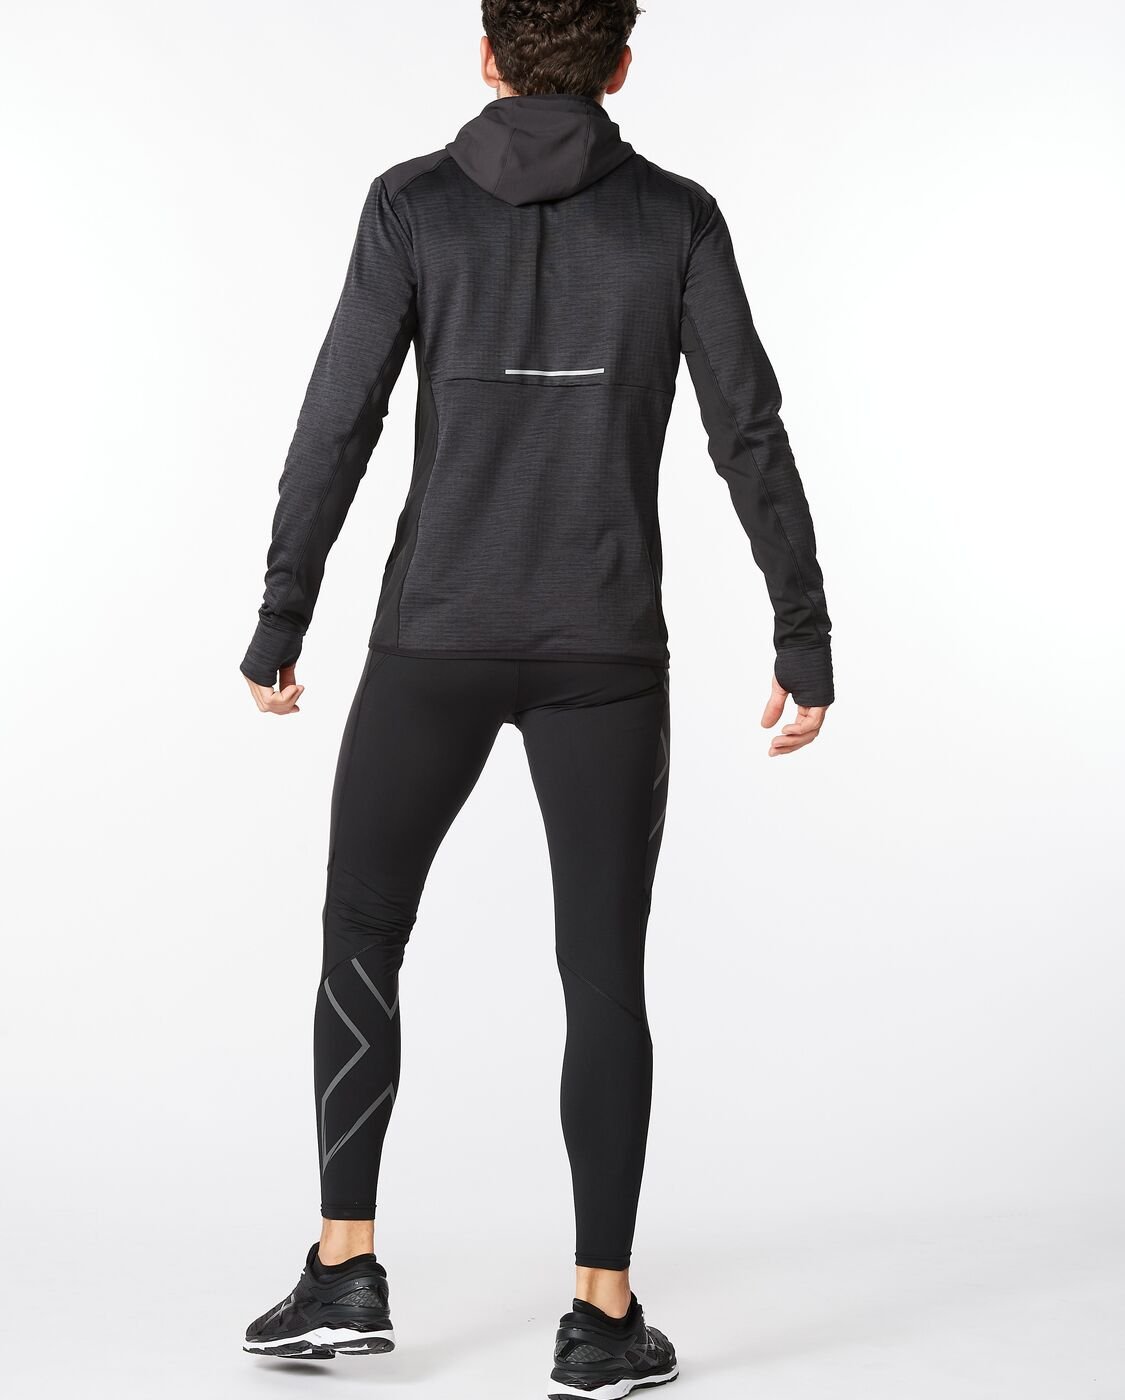 2XU South Africa - Mens Ignition Hooded Mid-Layer - Black/Silver Reflective